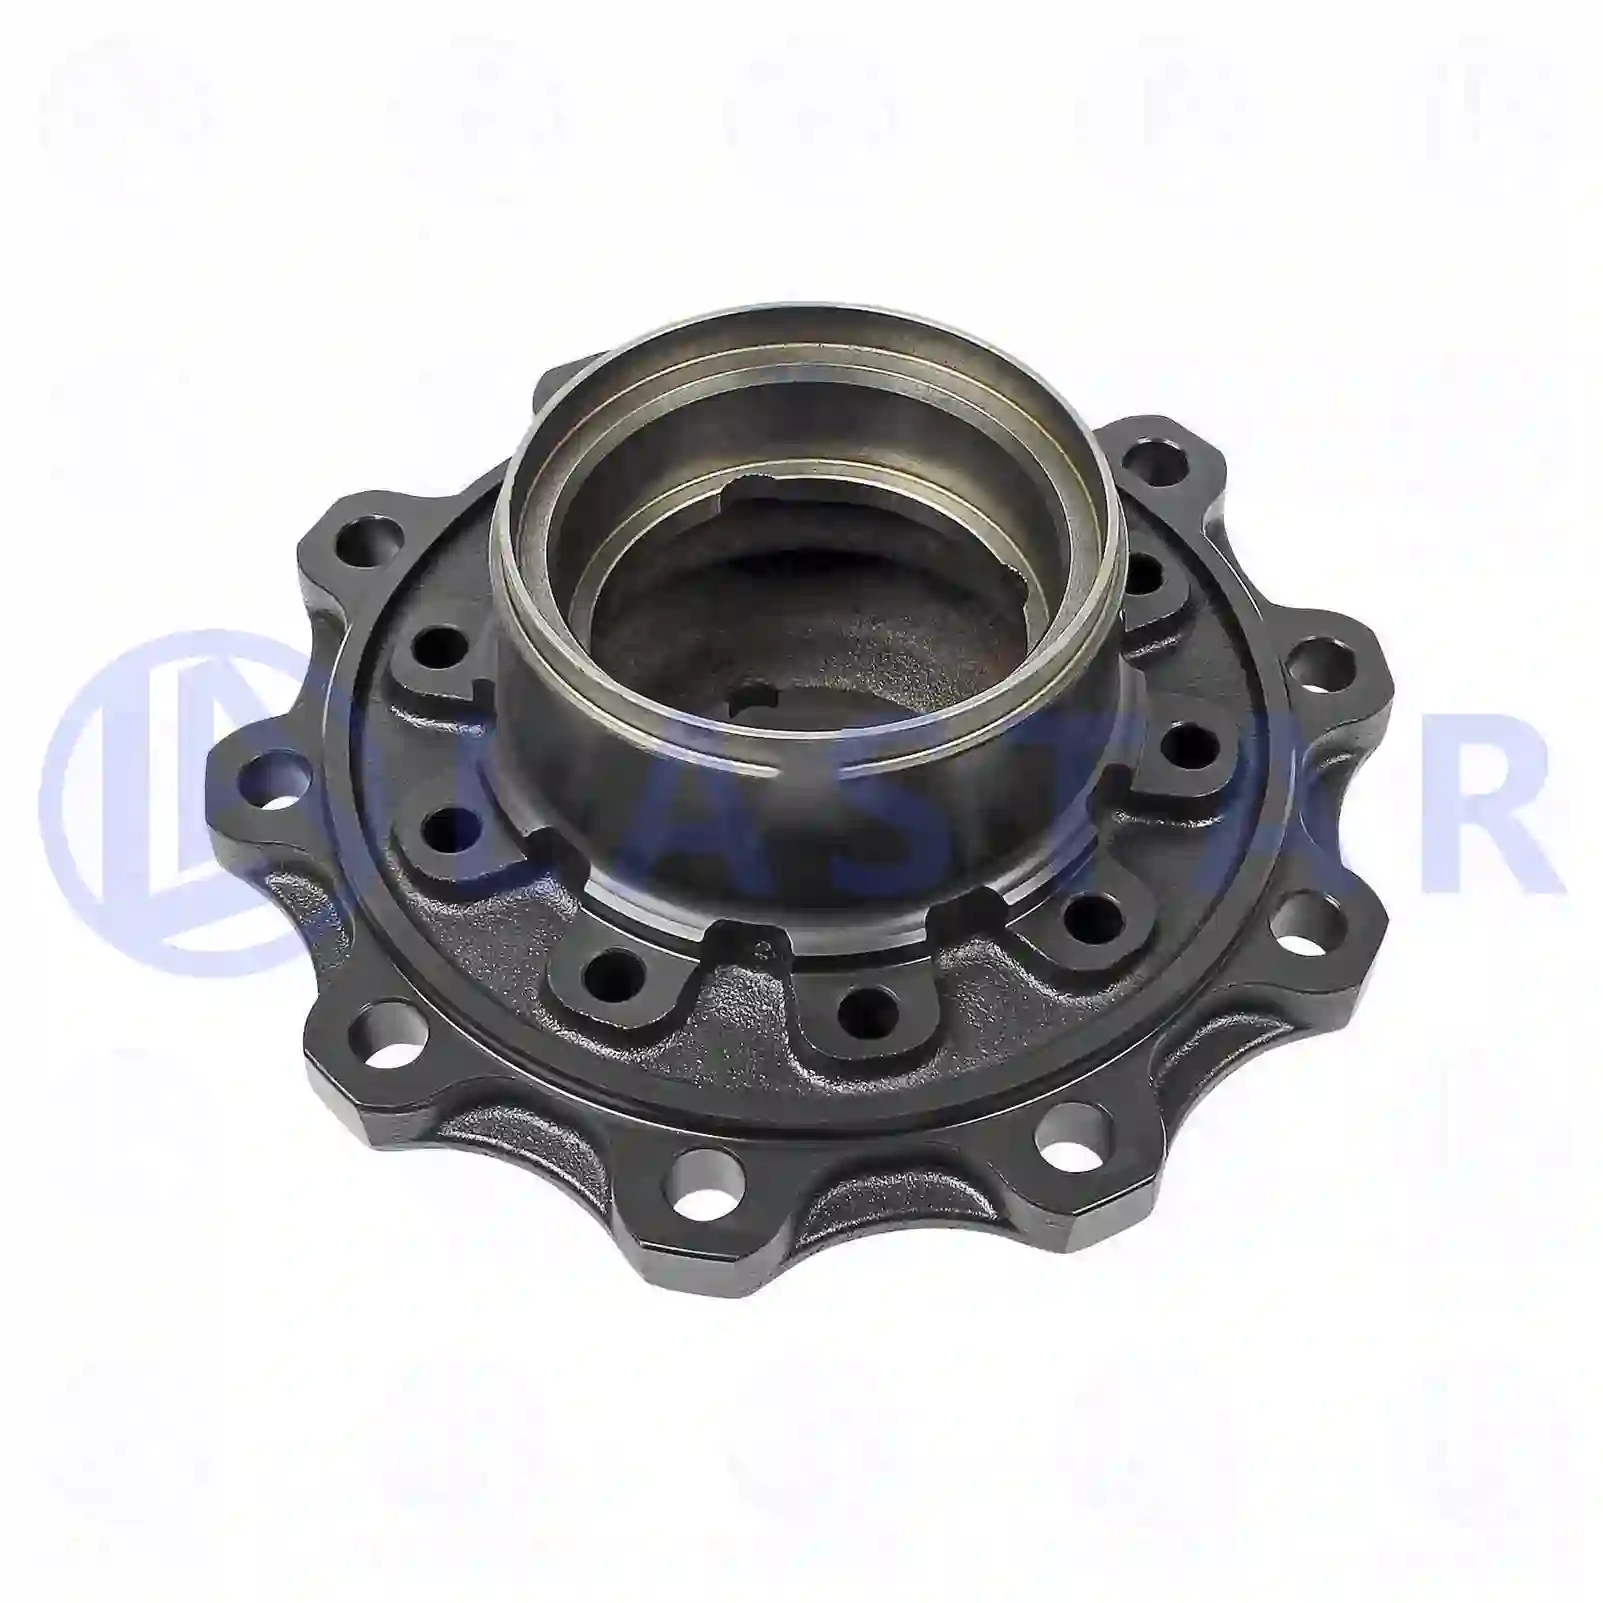 Wheel hub, without bearings, 77726952, 1382884, , , , , ||  77726952 Lastar Spare Part | Truck Spare Parts, Auotomotive Spare Parts Wheel hub, without bearings, 77726952, 1382884, , , , , ||  77726952 Lastar Spare Part | Truck Spare Parts, Auotomotive Spare Parts